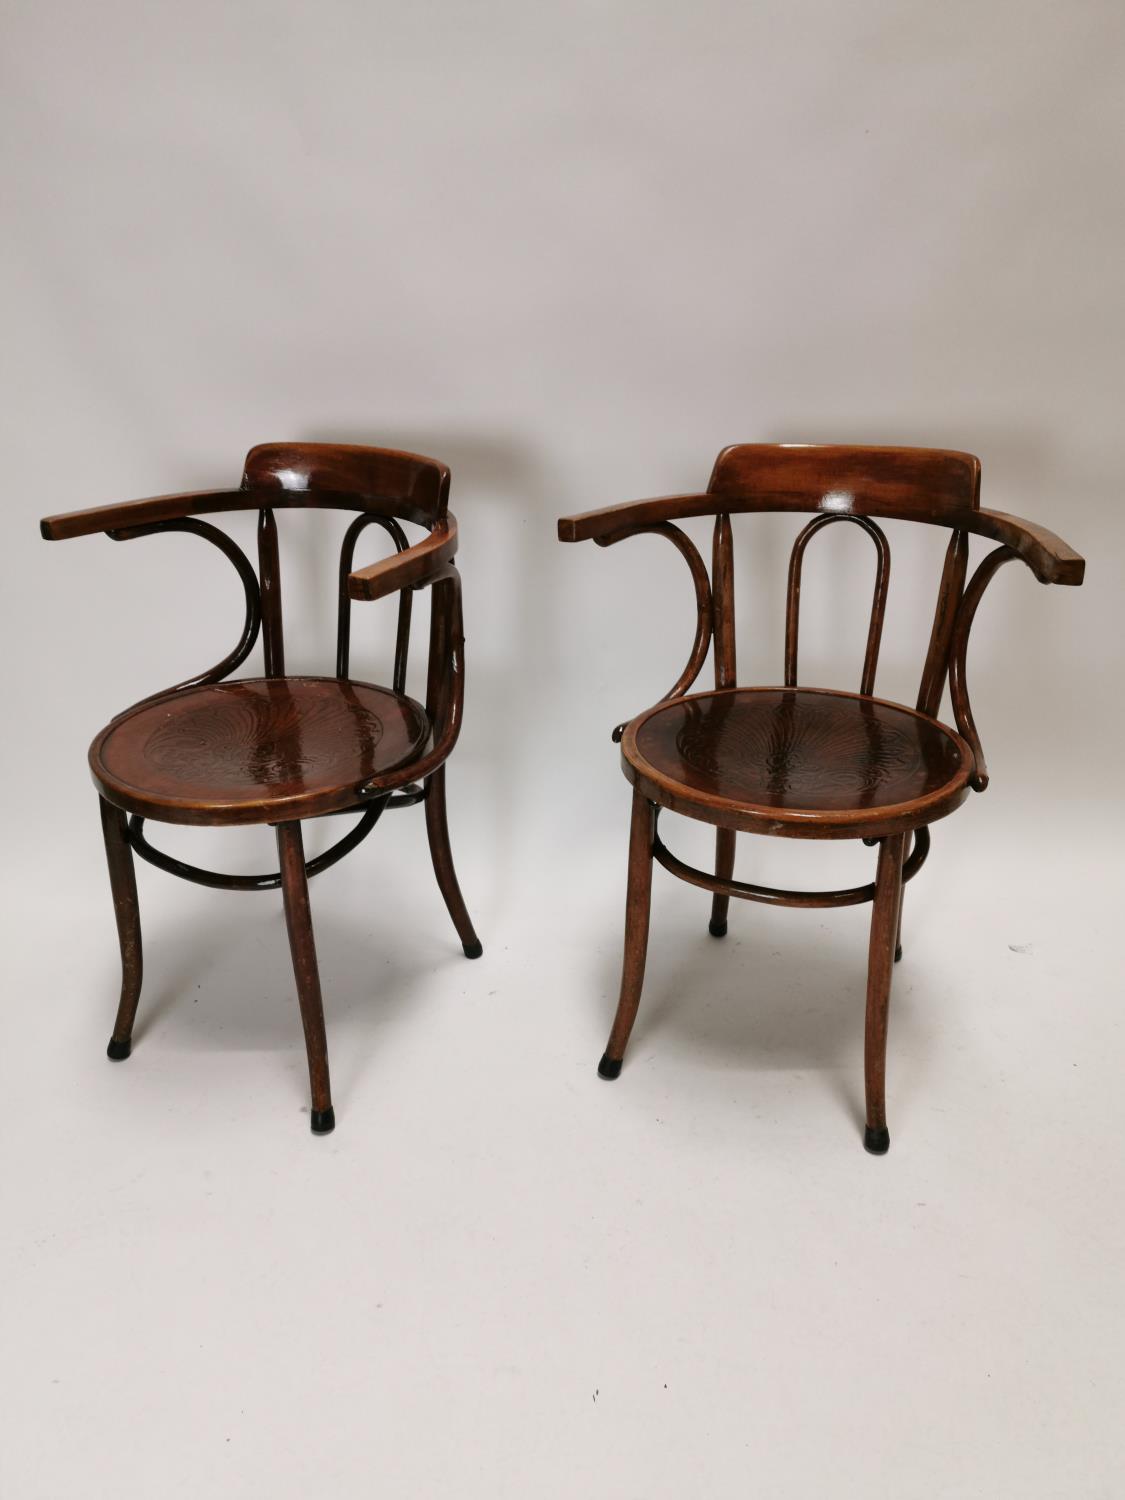 Pair of early 20th C. bent wood arm chairs {83 cm H x 63 cm W x 50 cm D}.